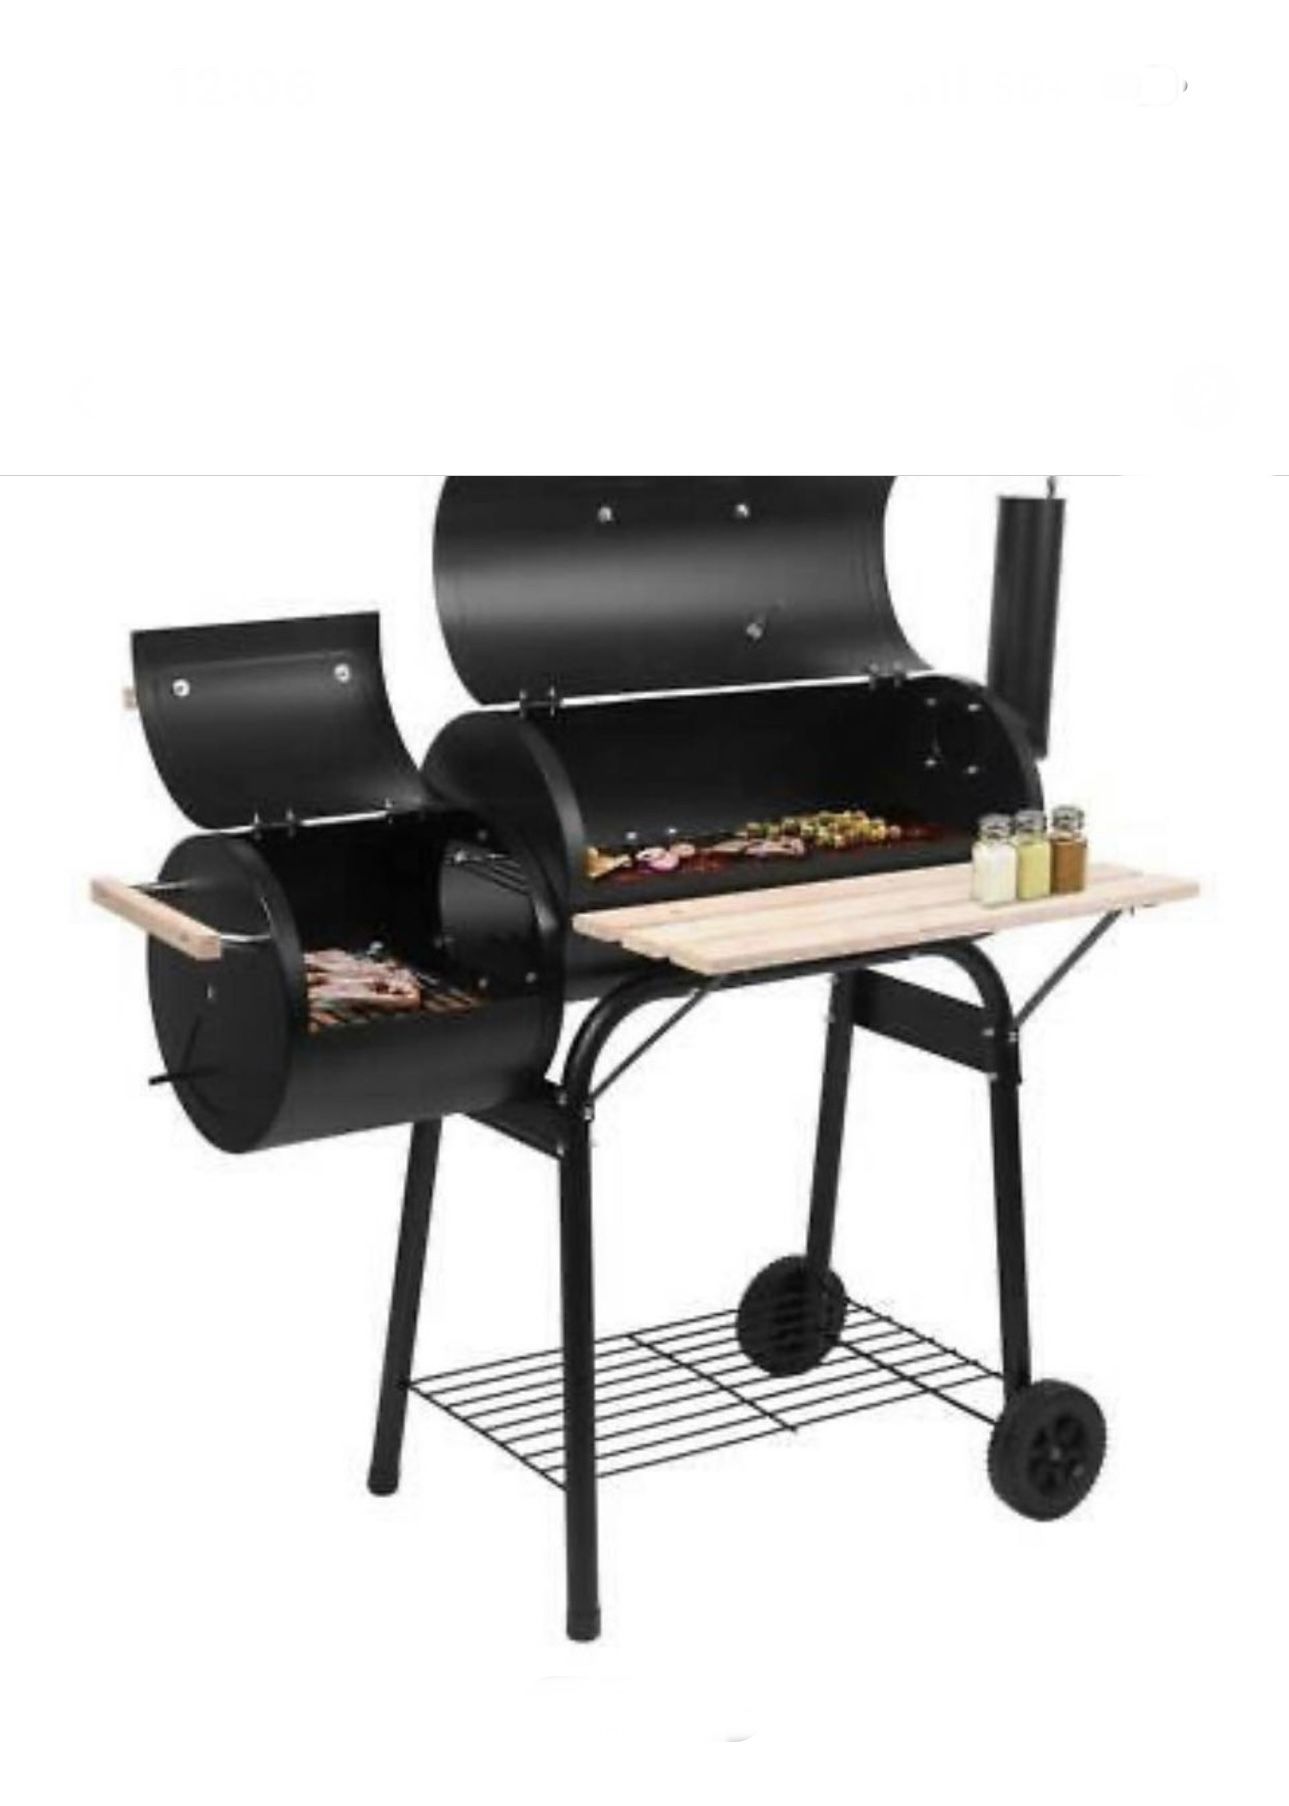 New Outdoor BBQ Grill  Charcoal Patio Meat Cooker Smoker